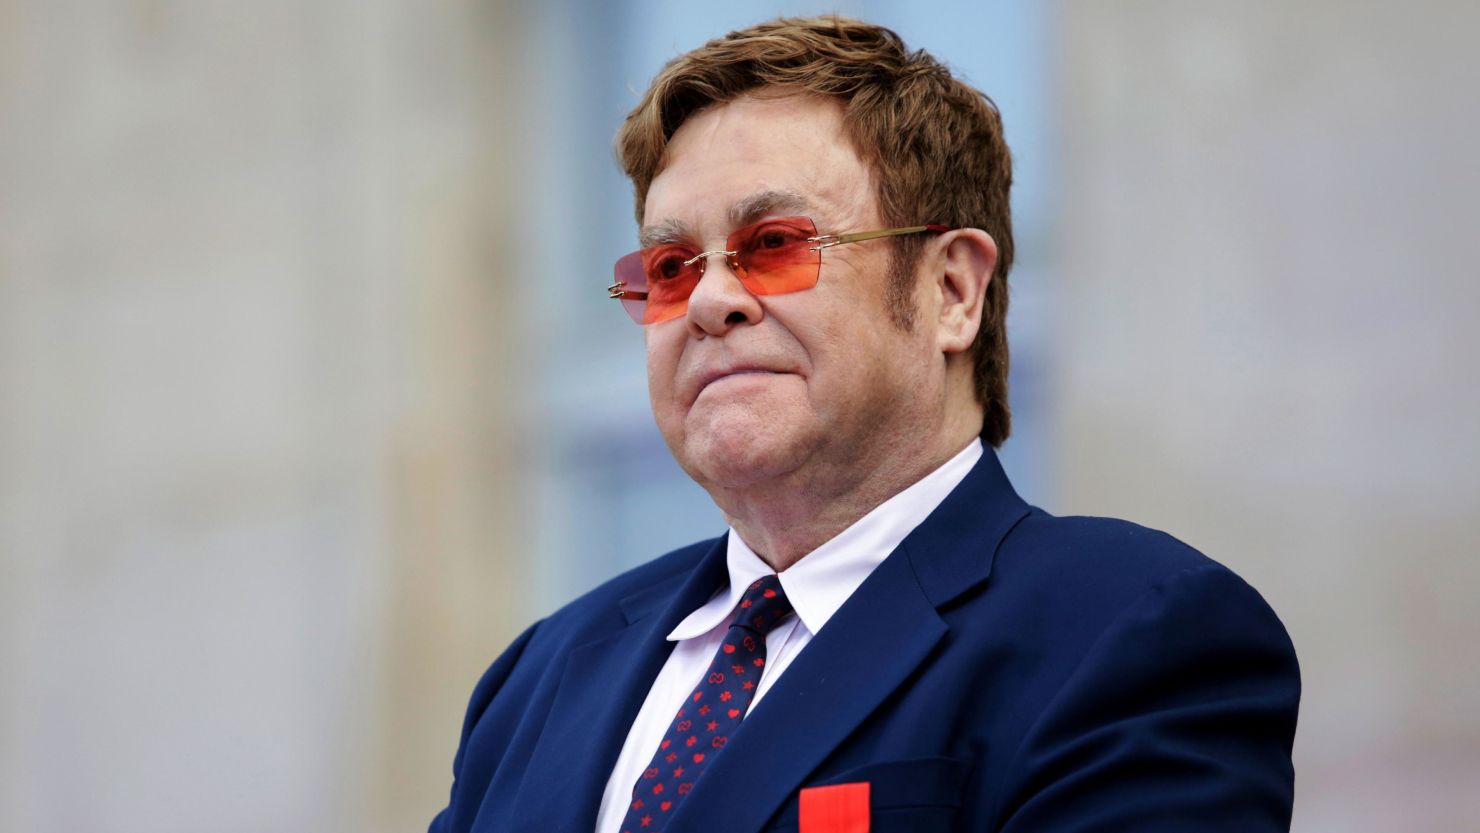 British singer-songwriter Elton John, pictured in June, has been awarded the Companion of Honour for services to music and charity.